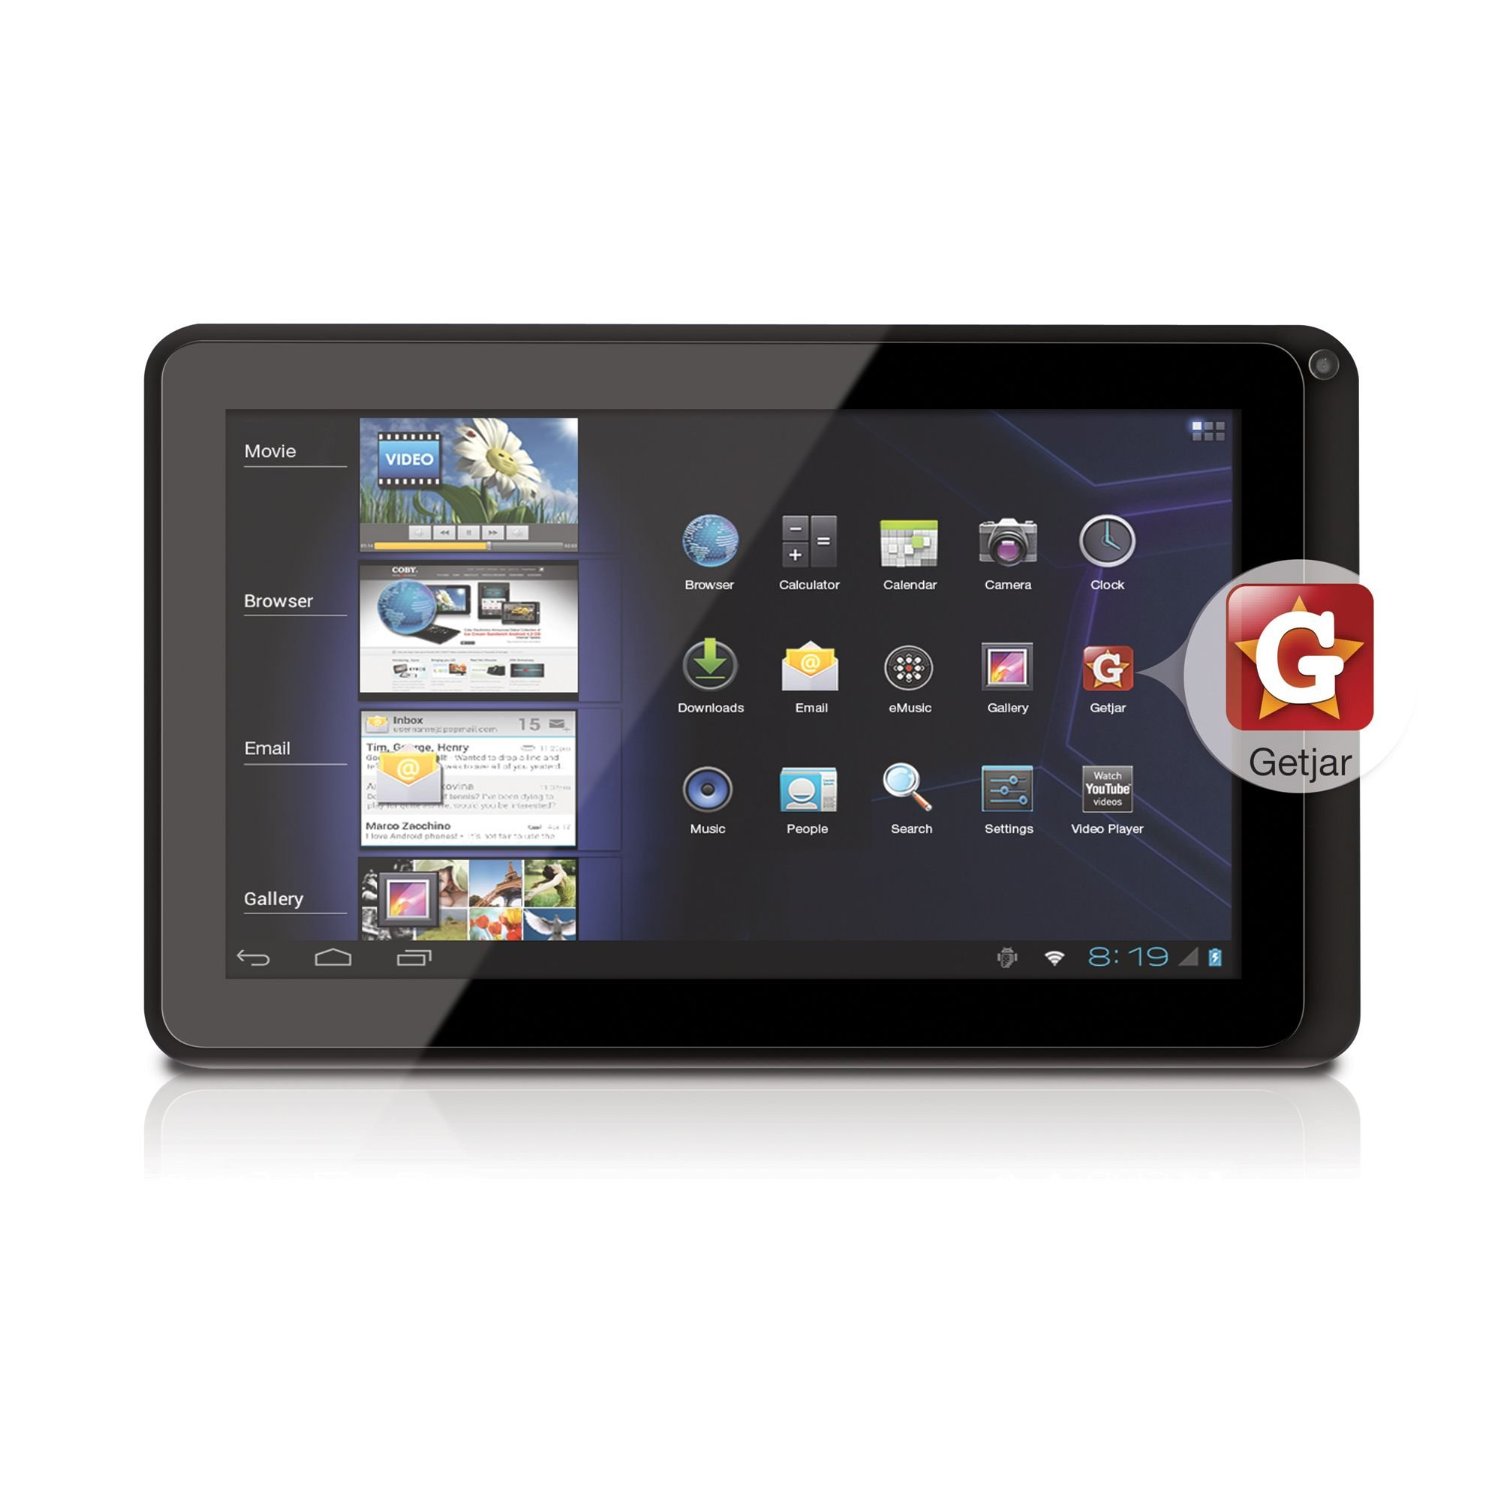 http://thetechjournal.com/wp-content/uploads/images/1206/1339867848-coby-kyros-101inch-android-powered-internet-tablet-8.jpg